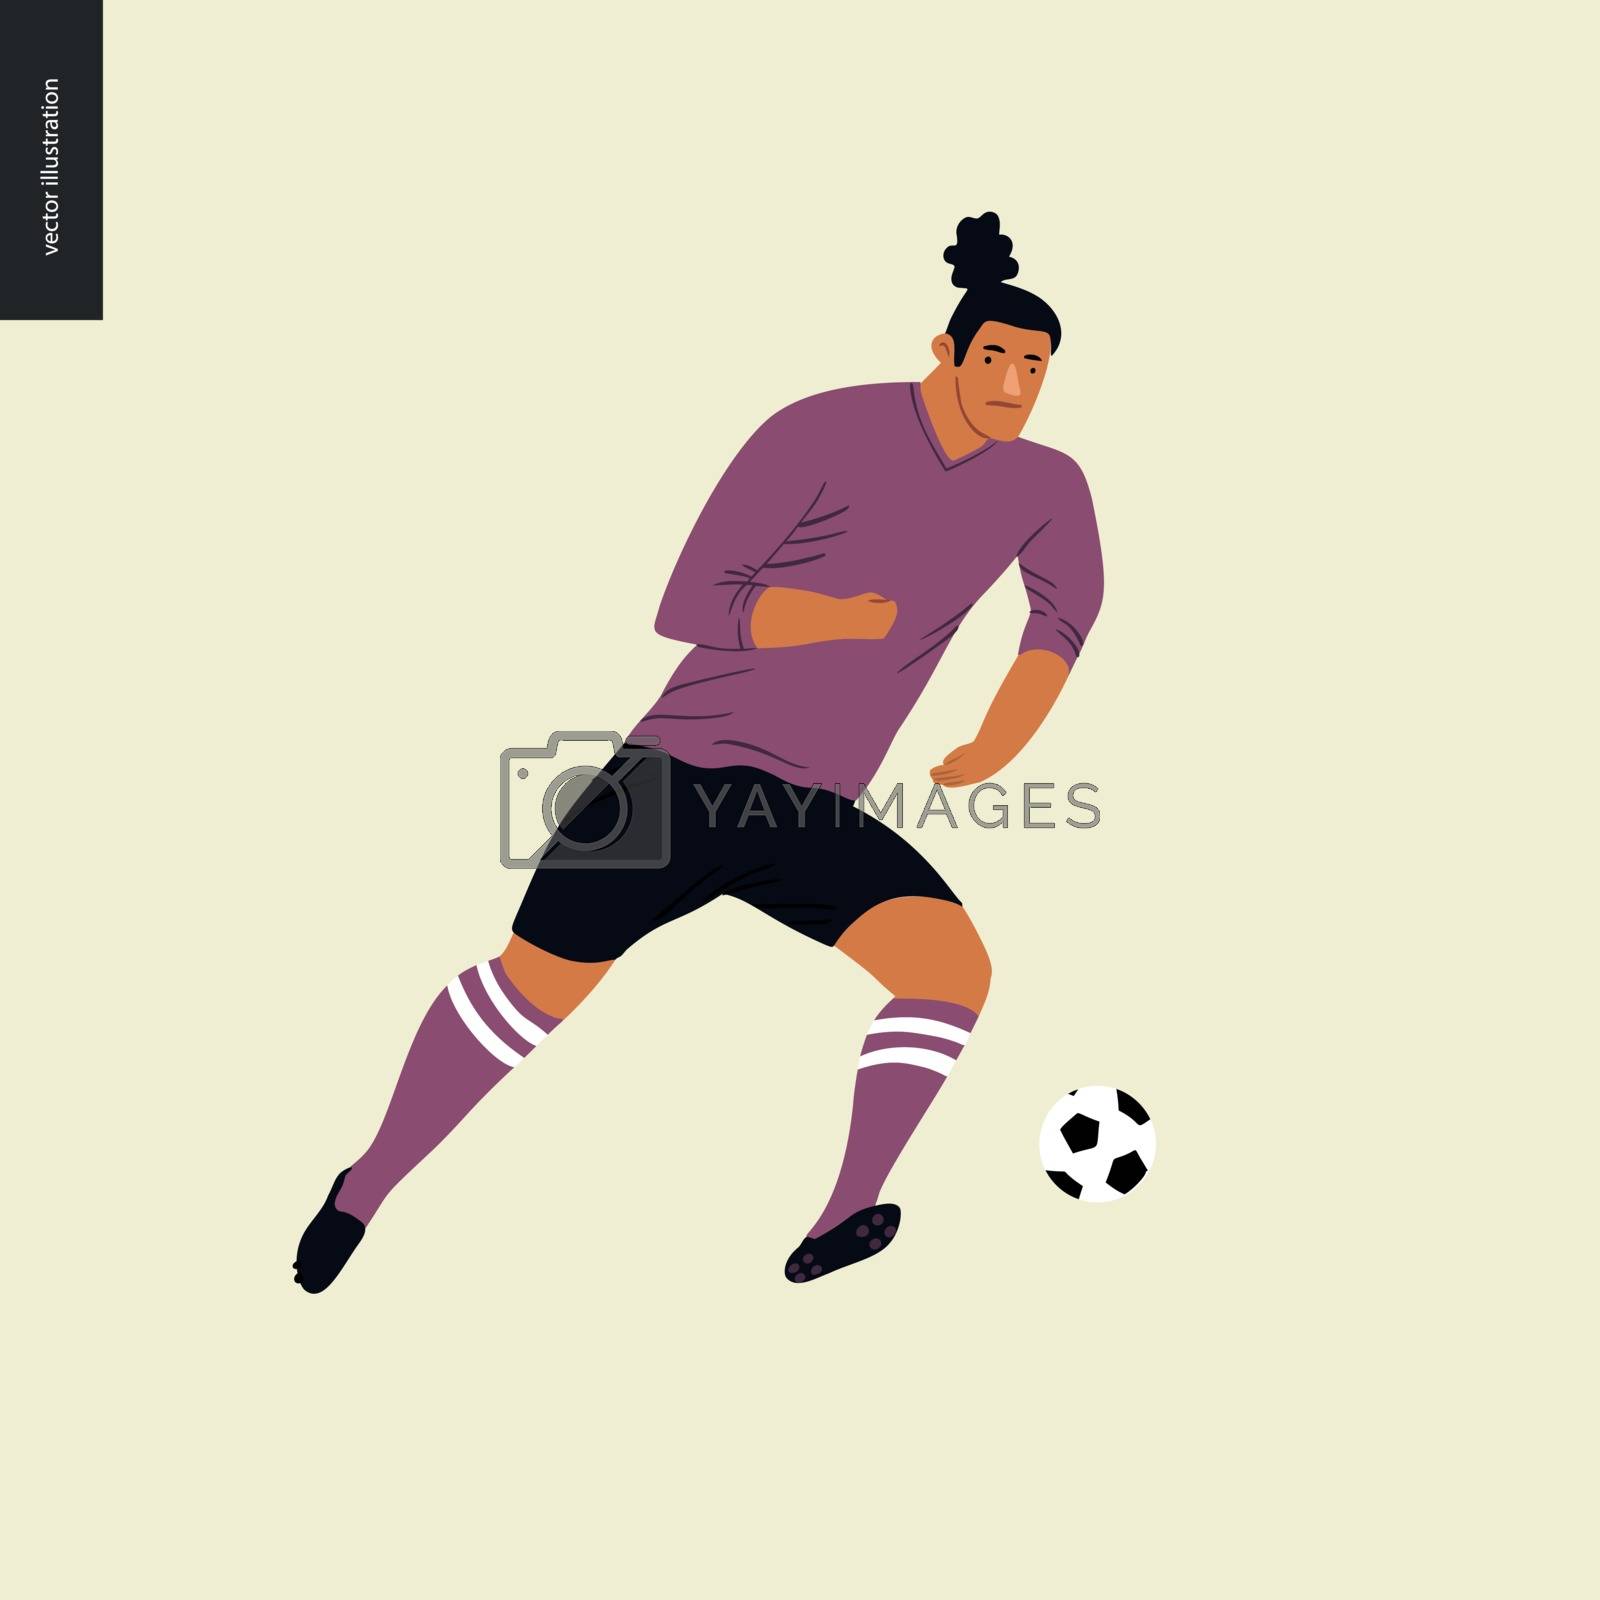 Royalty free image of European football, soccer player by grivina